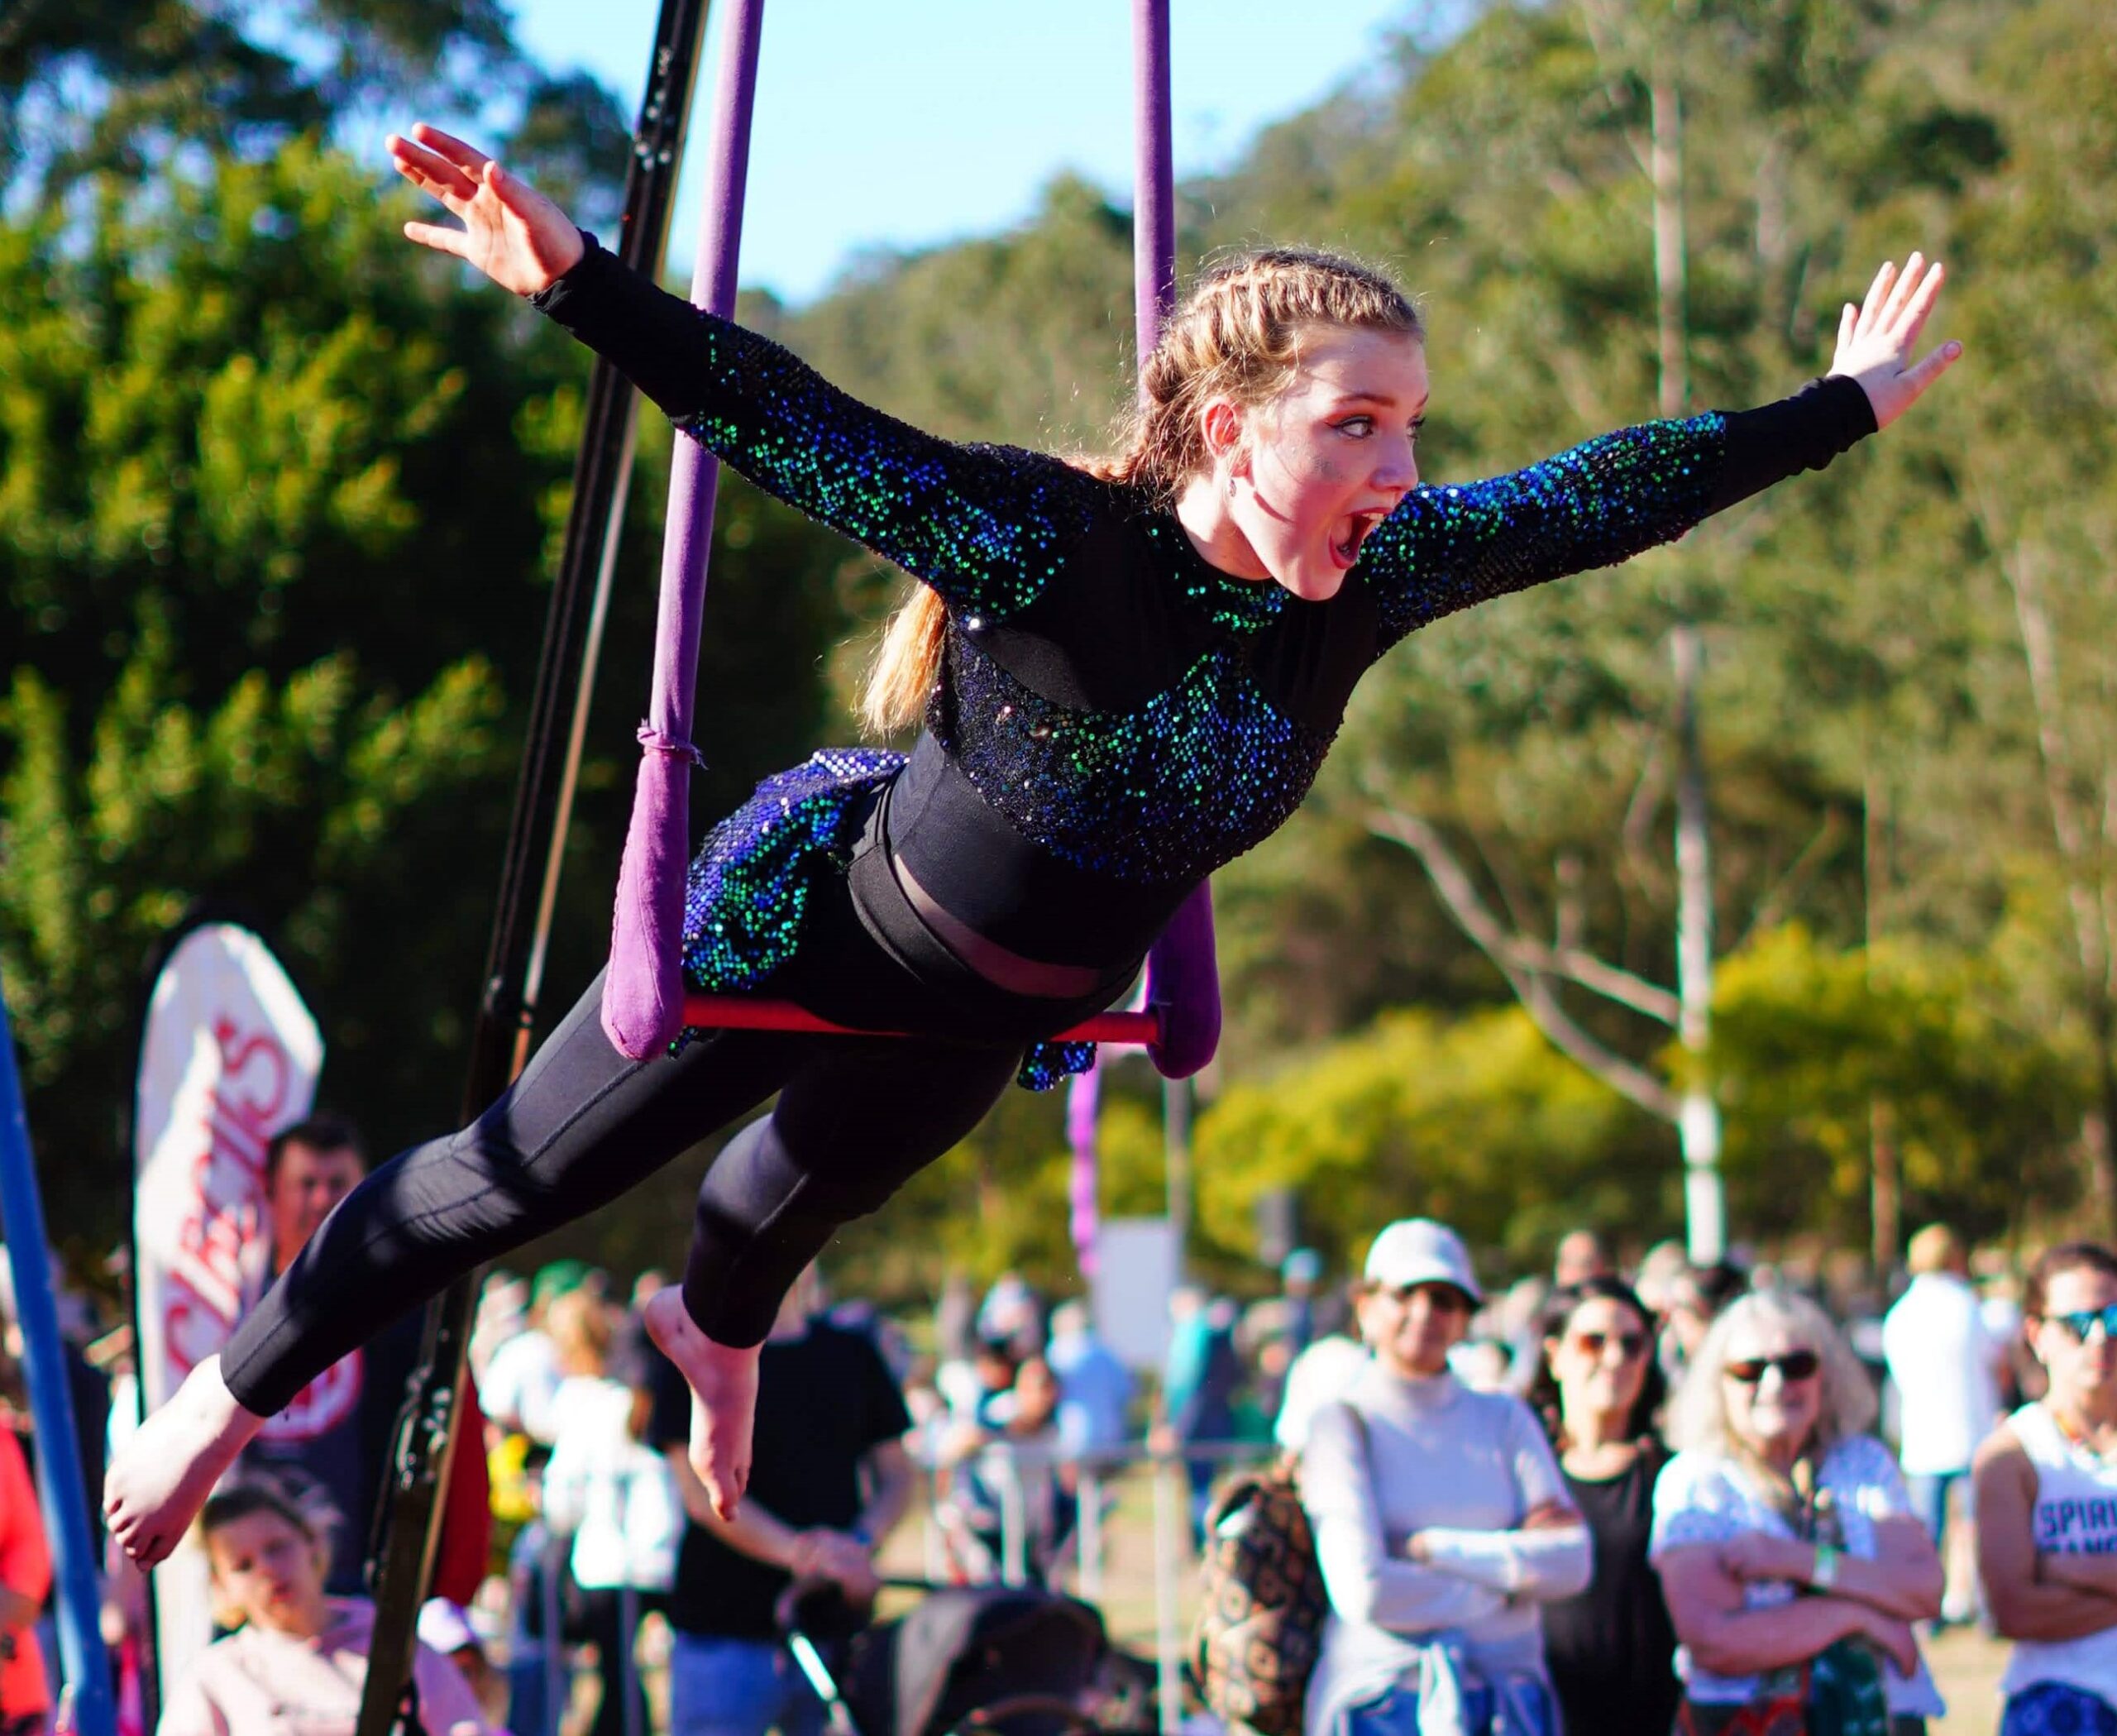 An awe-inspiring shot of a young artist mid-air during a trapeze act, displaying grace and strength.